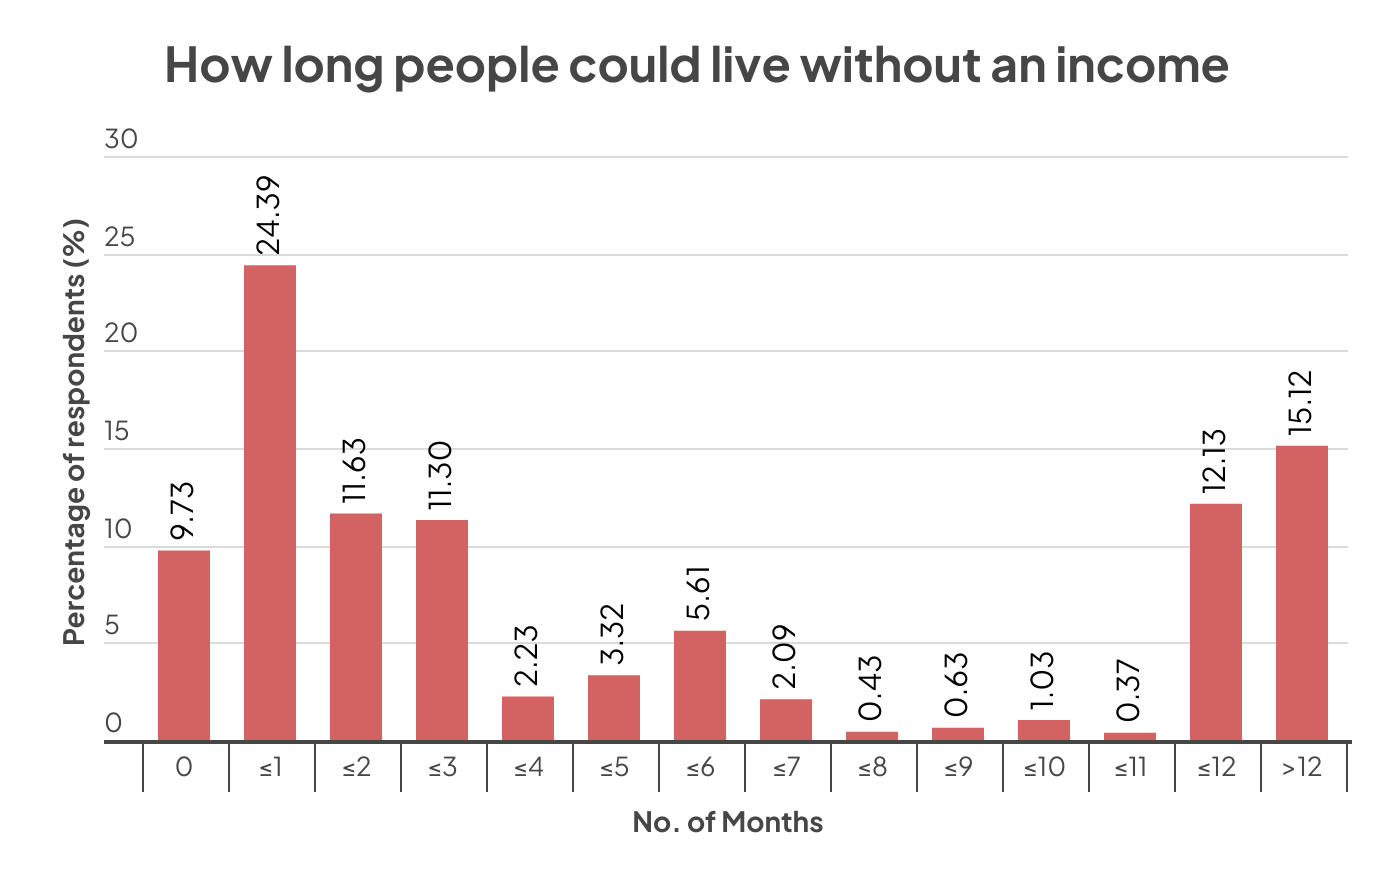 How long people could live without an income graph global